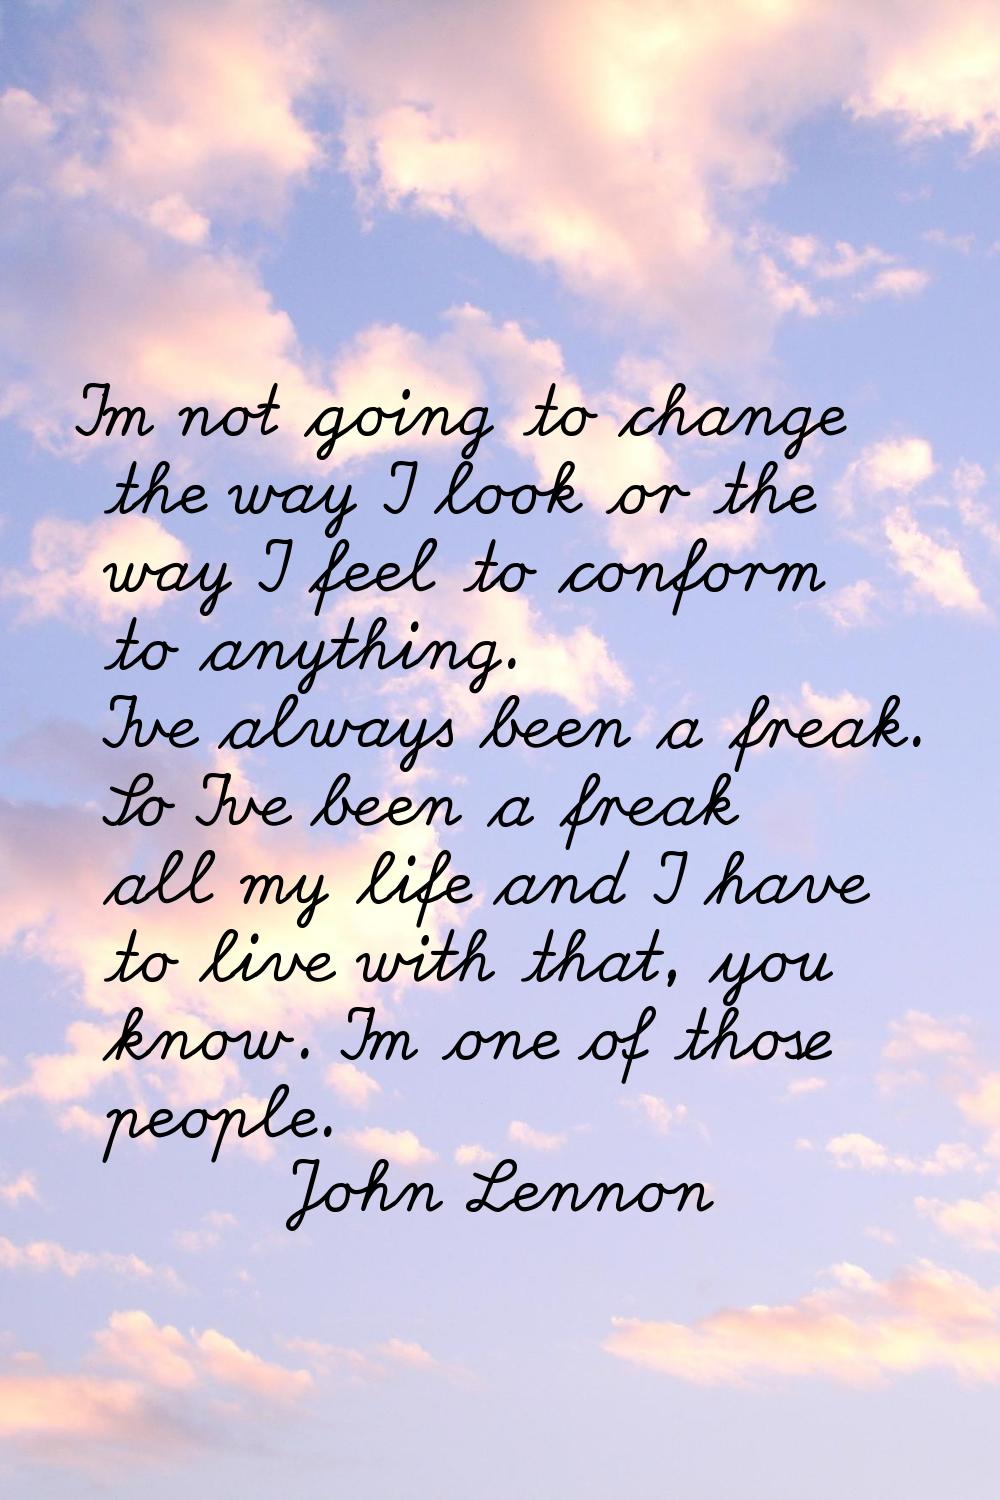 I'm not going to change the way I look or the way I feel to conform to anything. I've always been a